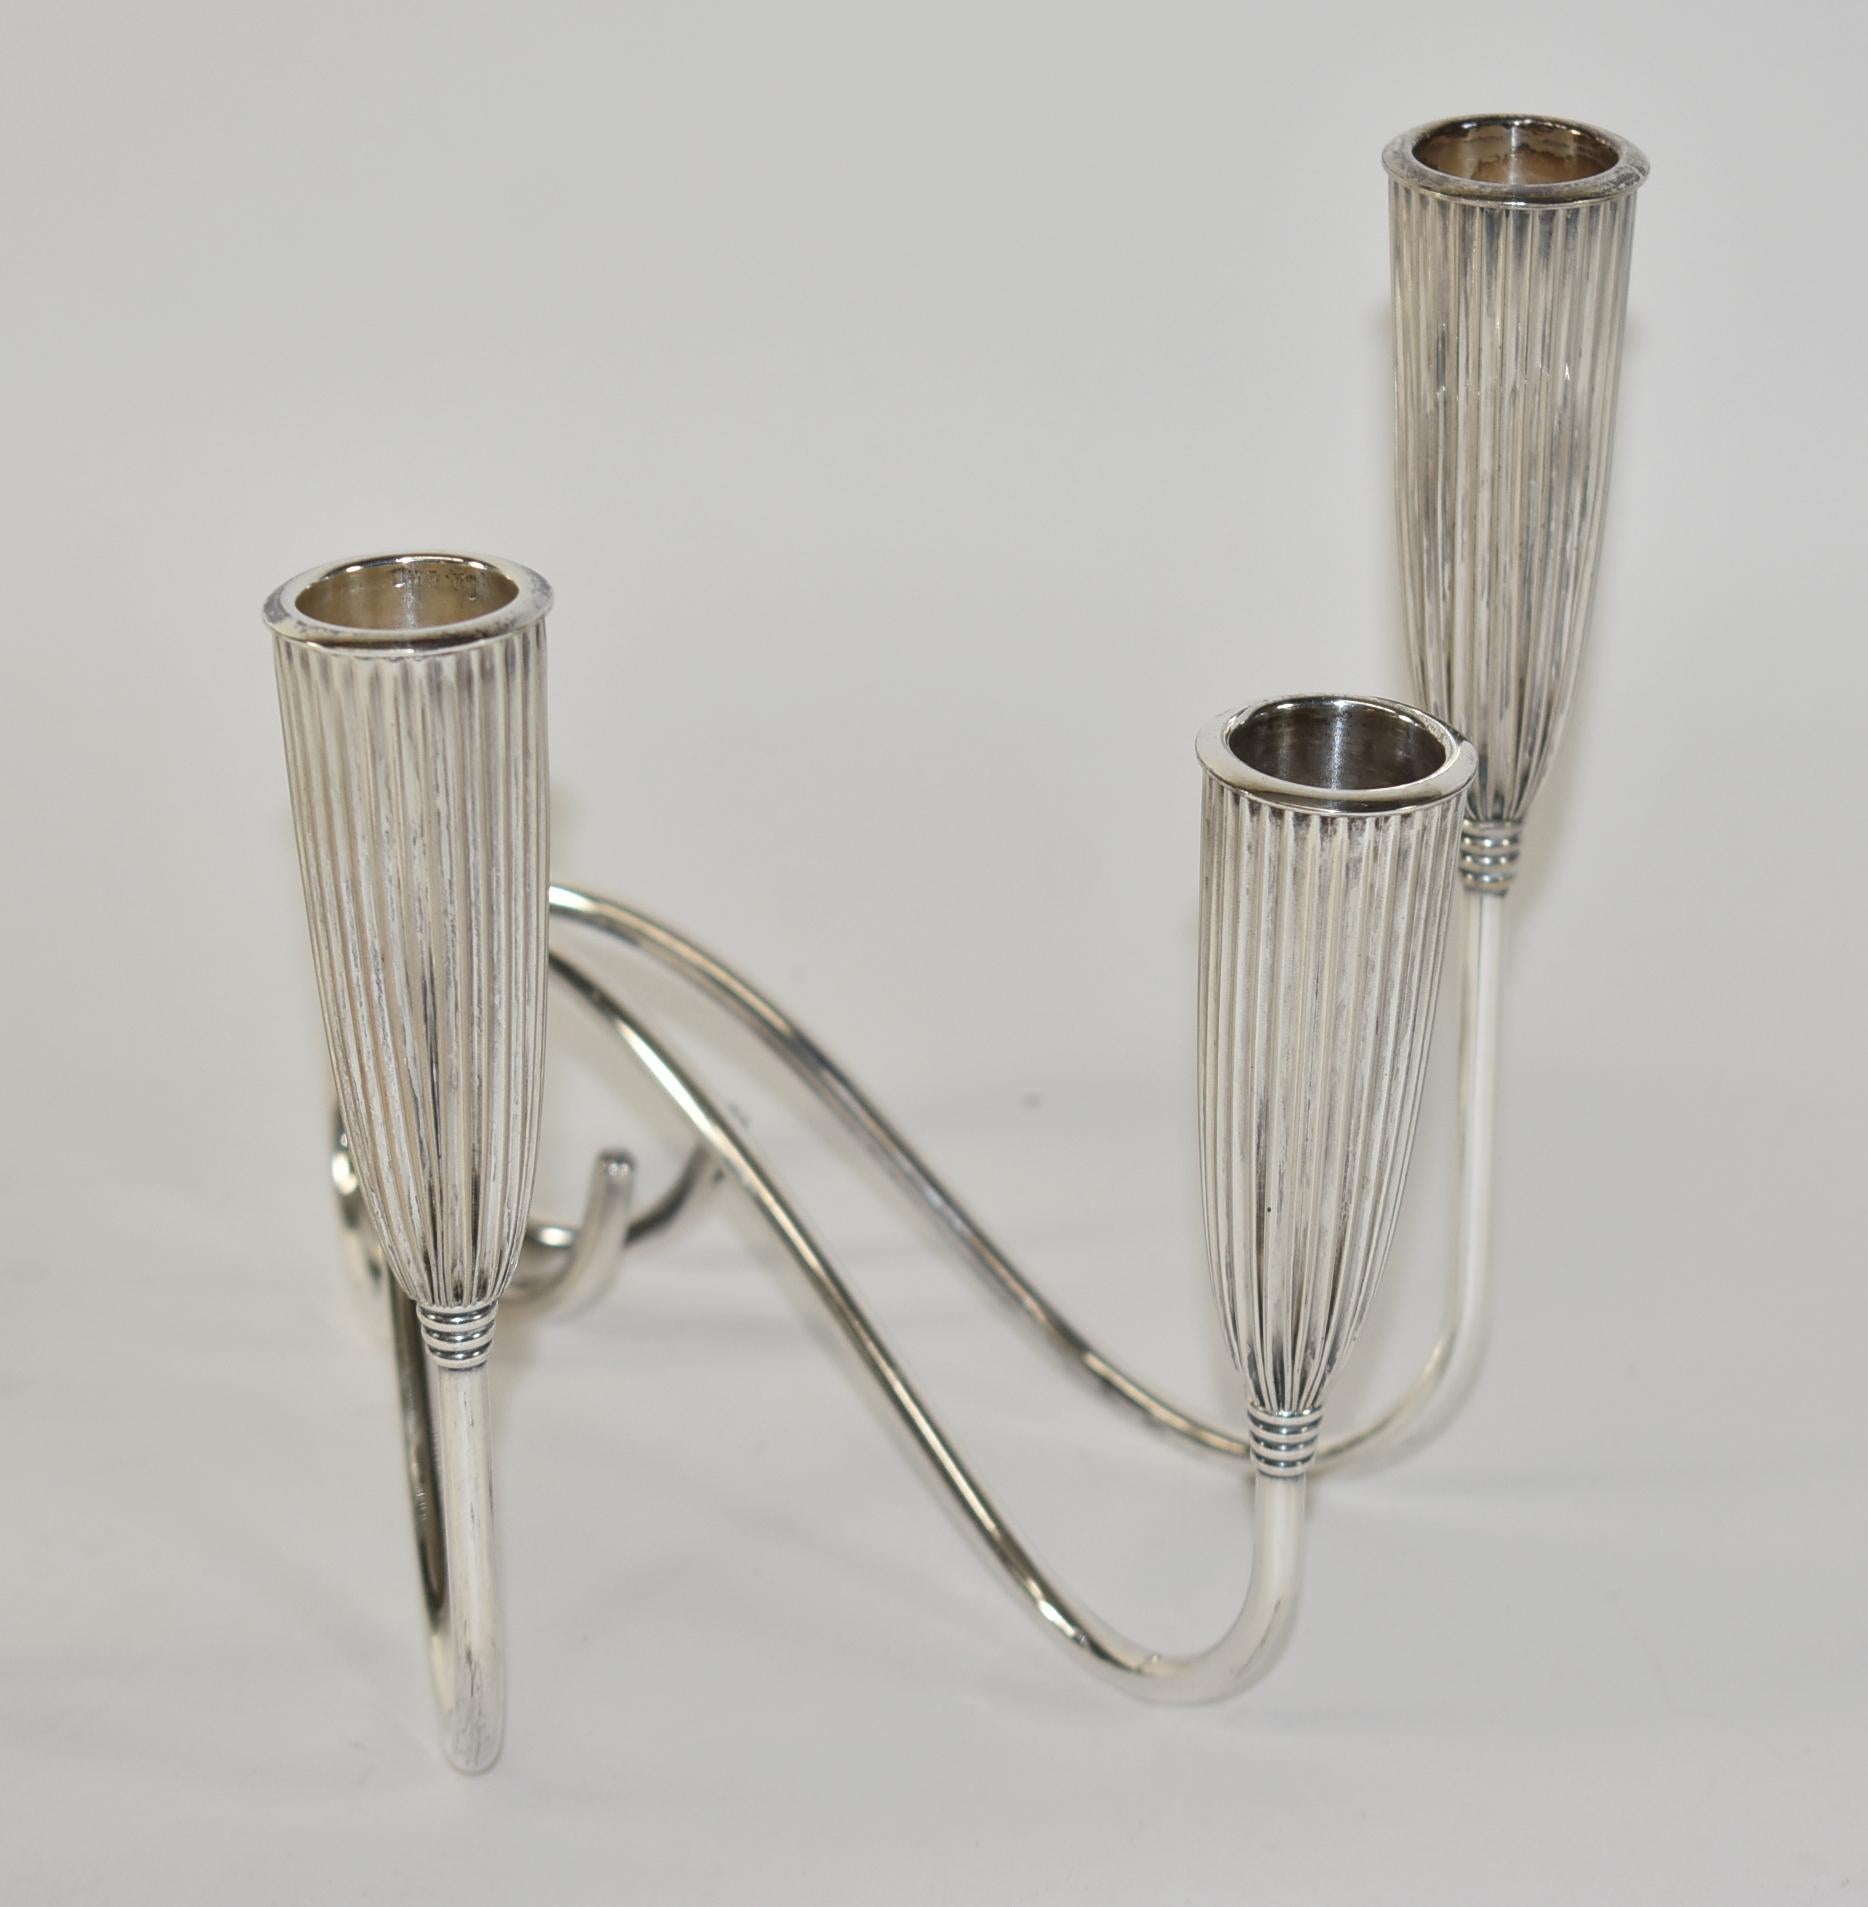 This elegant and graphic pair of sliver plated triple branch candlestick were realized by the celebrated design firm Napier Company in the USA, circa 1910. Features three undulating arms that culminate in fluted bullet form supports. Overall very